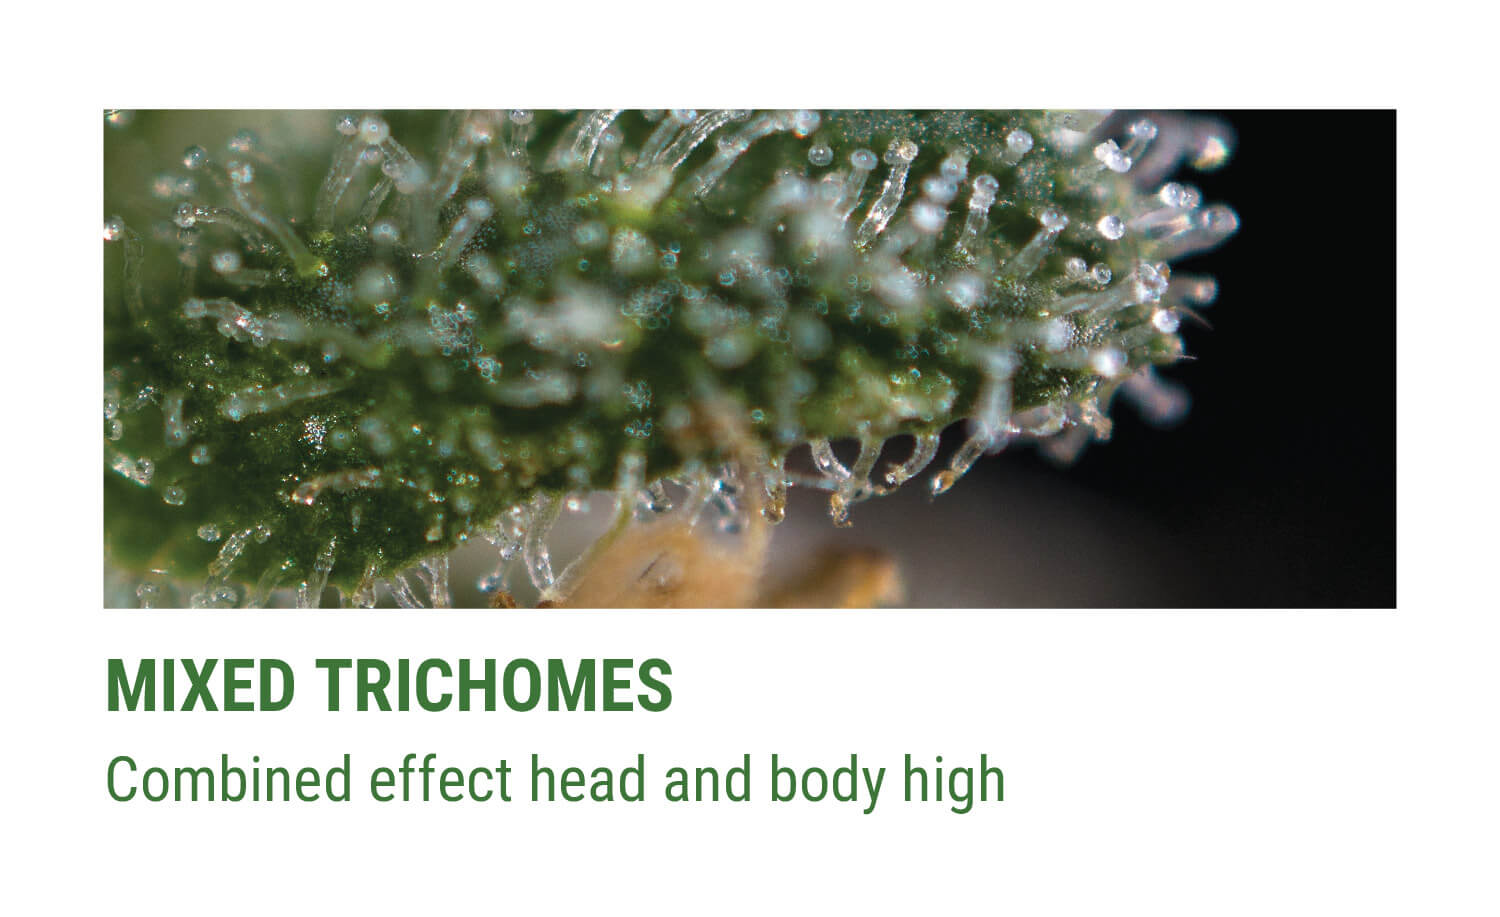 MIXED TRICHOMES